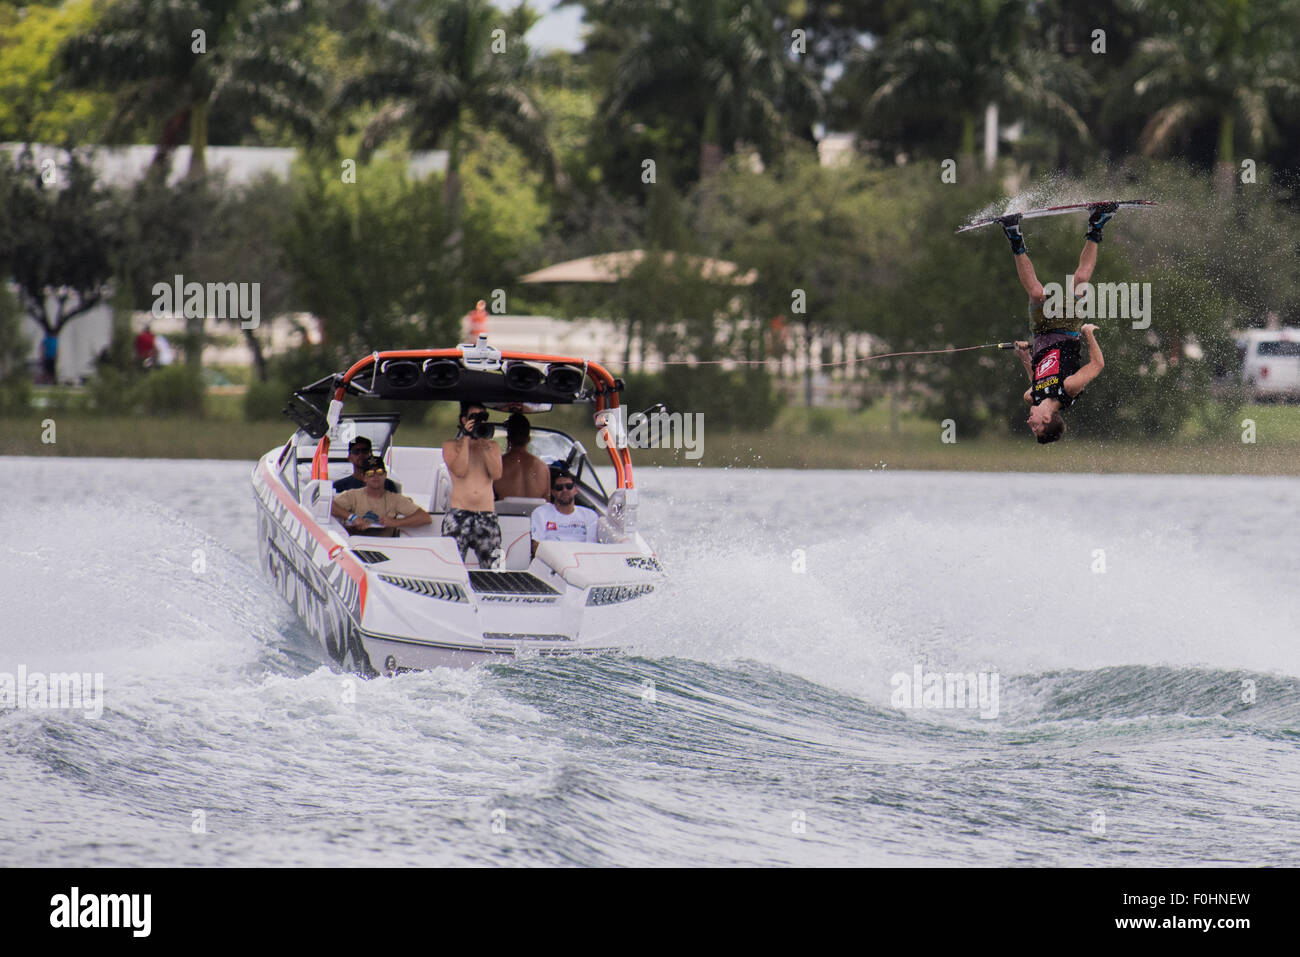 Wakeboarding National Championship at Miami Watersports Complex, Amelia Earhart Park, Hialeah, Florida. Stock Photo